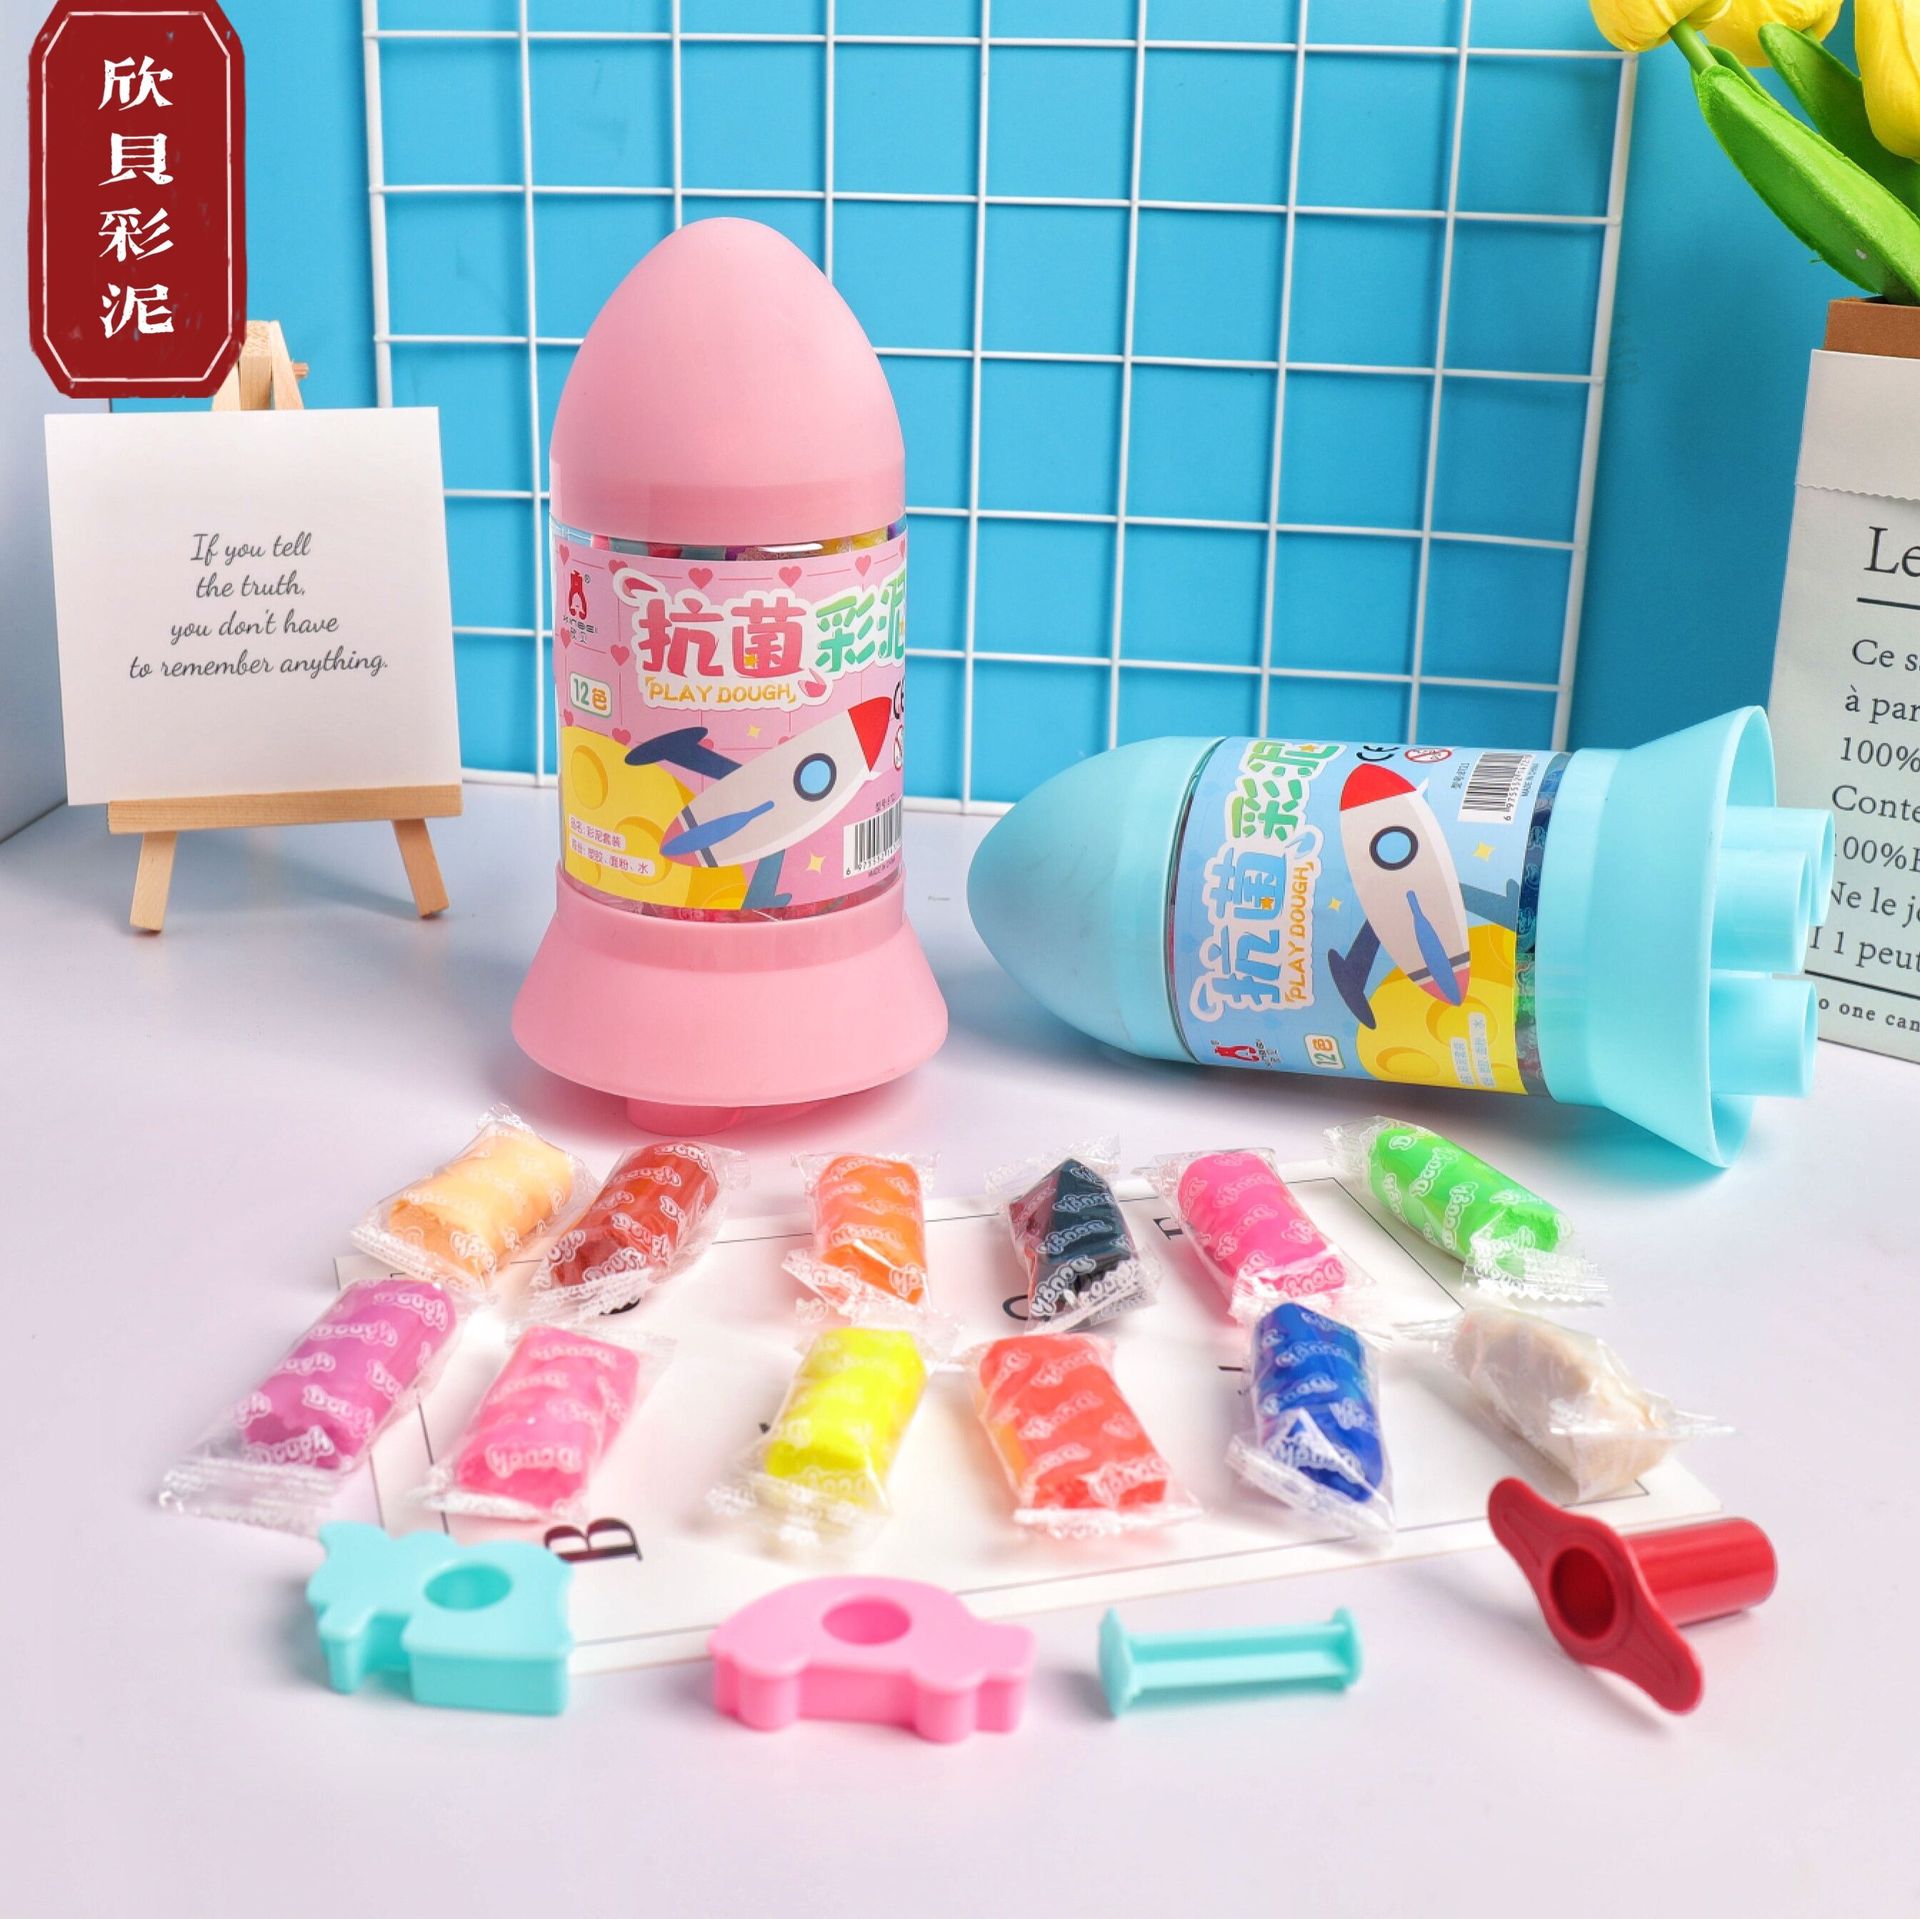 Xinbei Wheat Meal Colored Clay 12 Colors 150G Handmade Non-Toxic Light Brickearth Kindergarten Plasticene Play